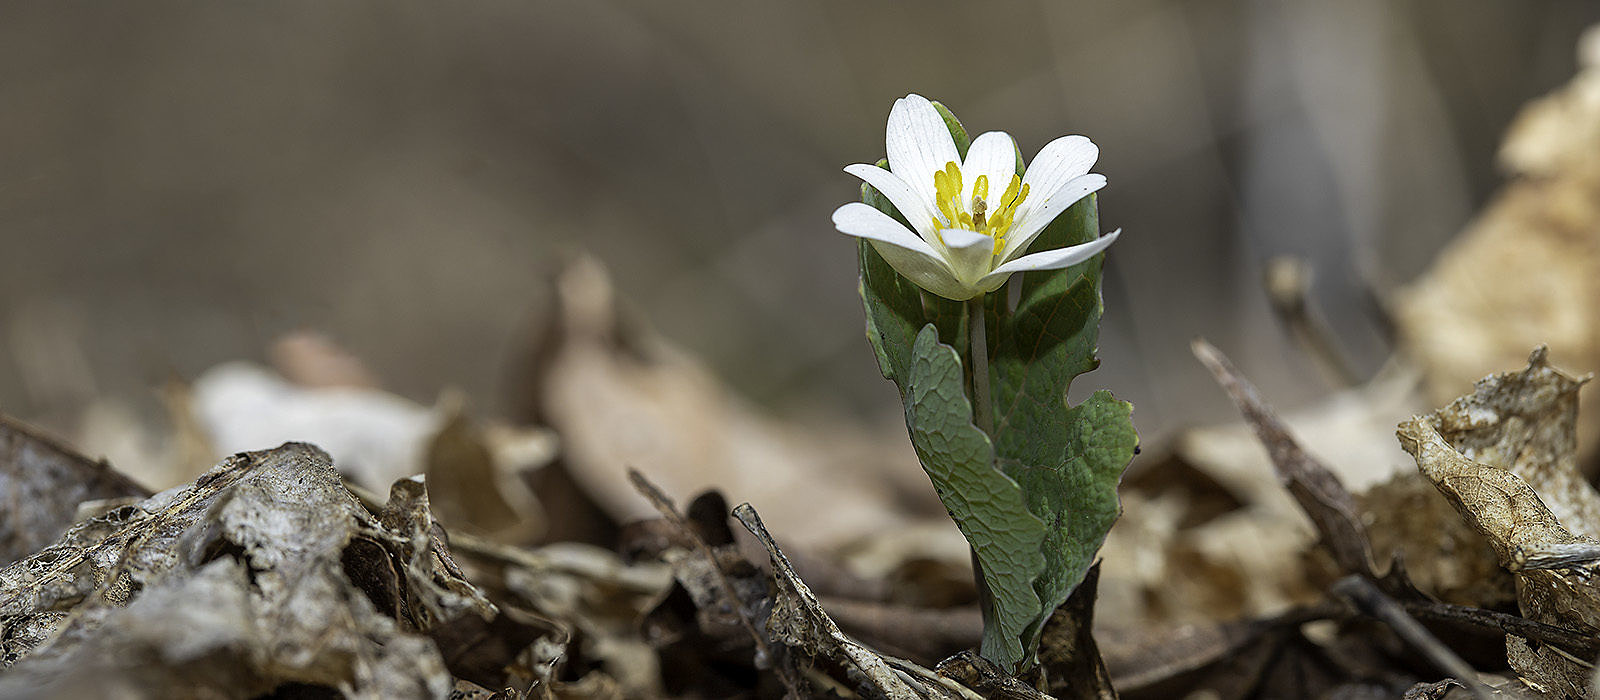 Bloodroot (Sanguinaria canadensis) by Bryan Pfeiffer